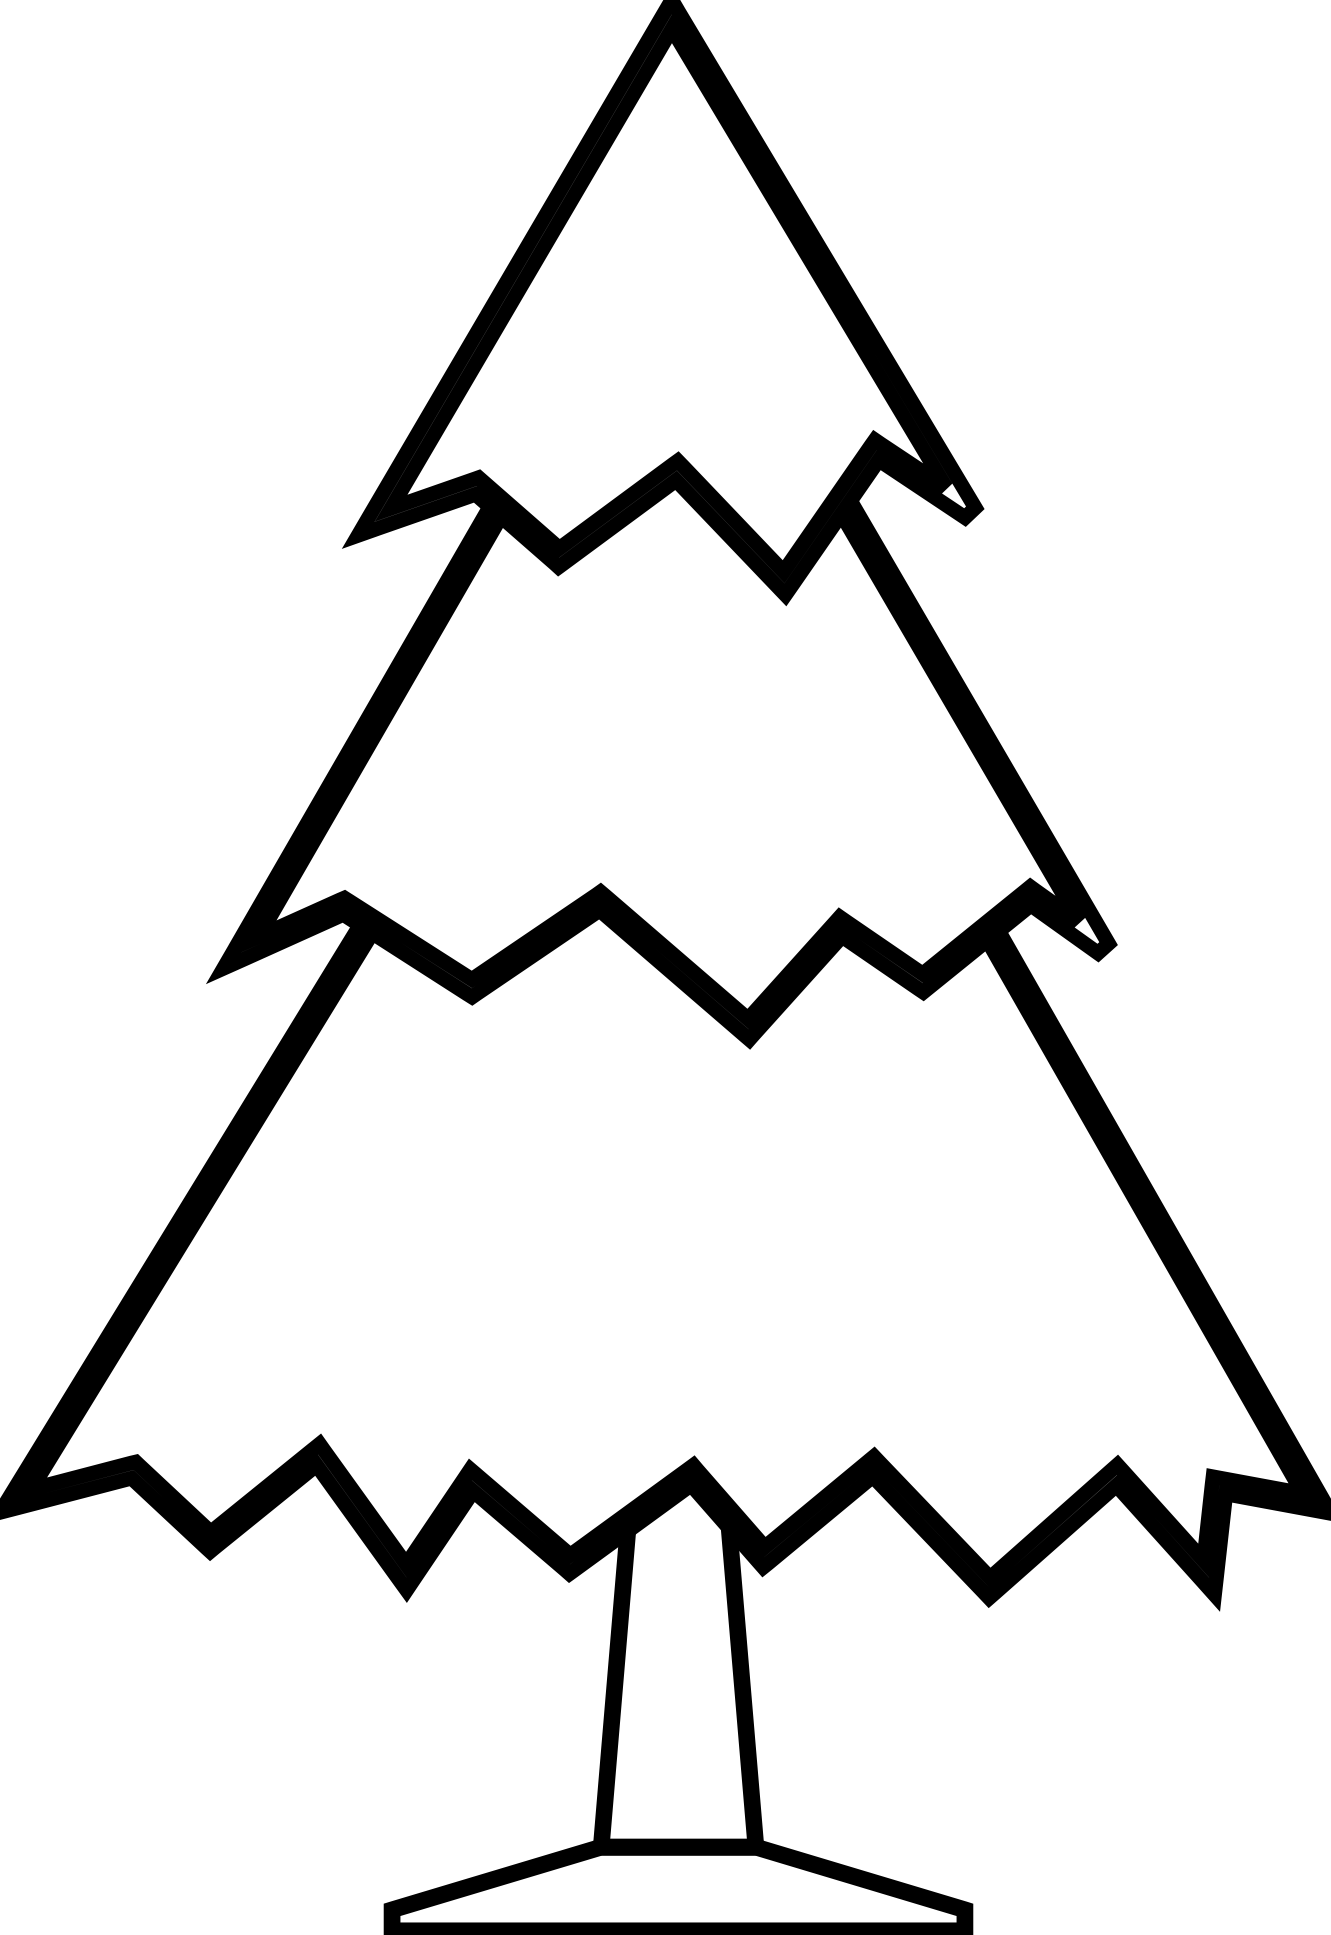 White Christmas Tree Clip Art - Clipart library - Clipart library